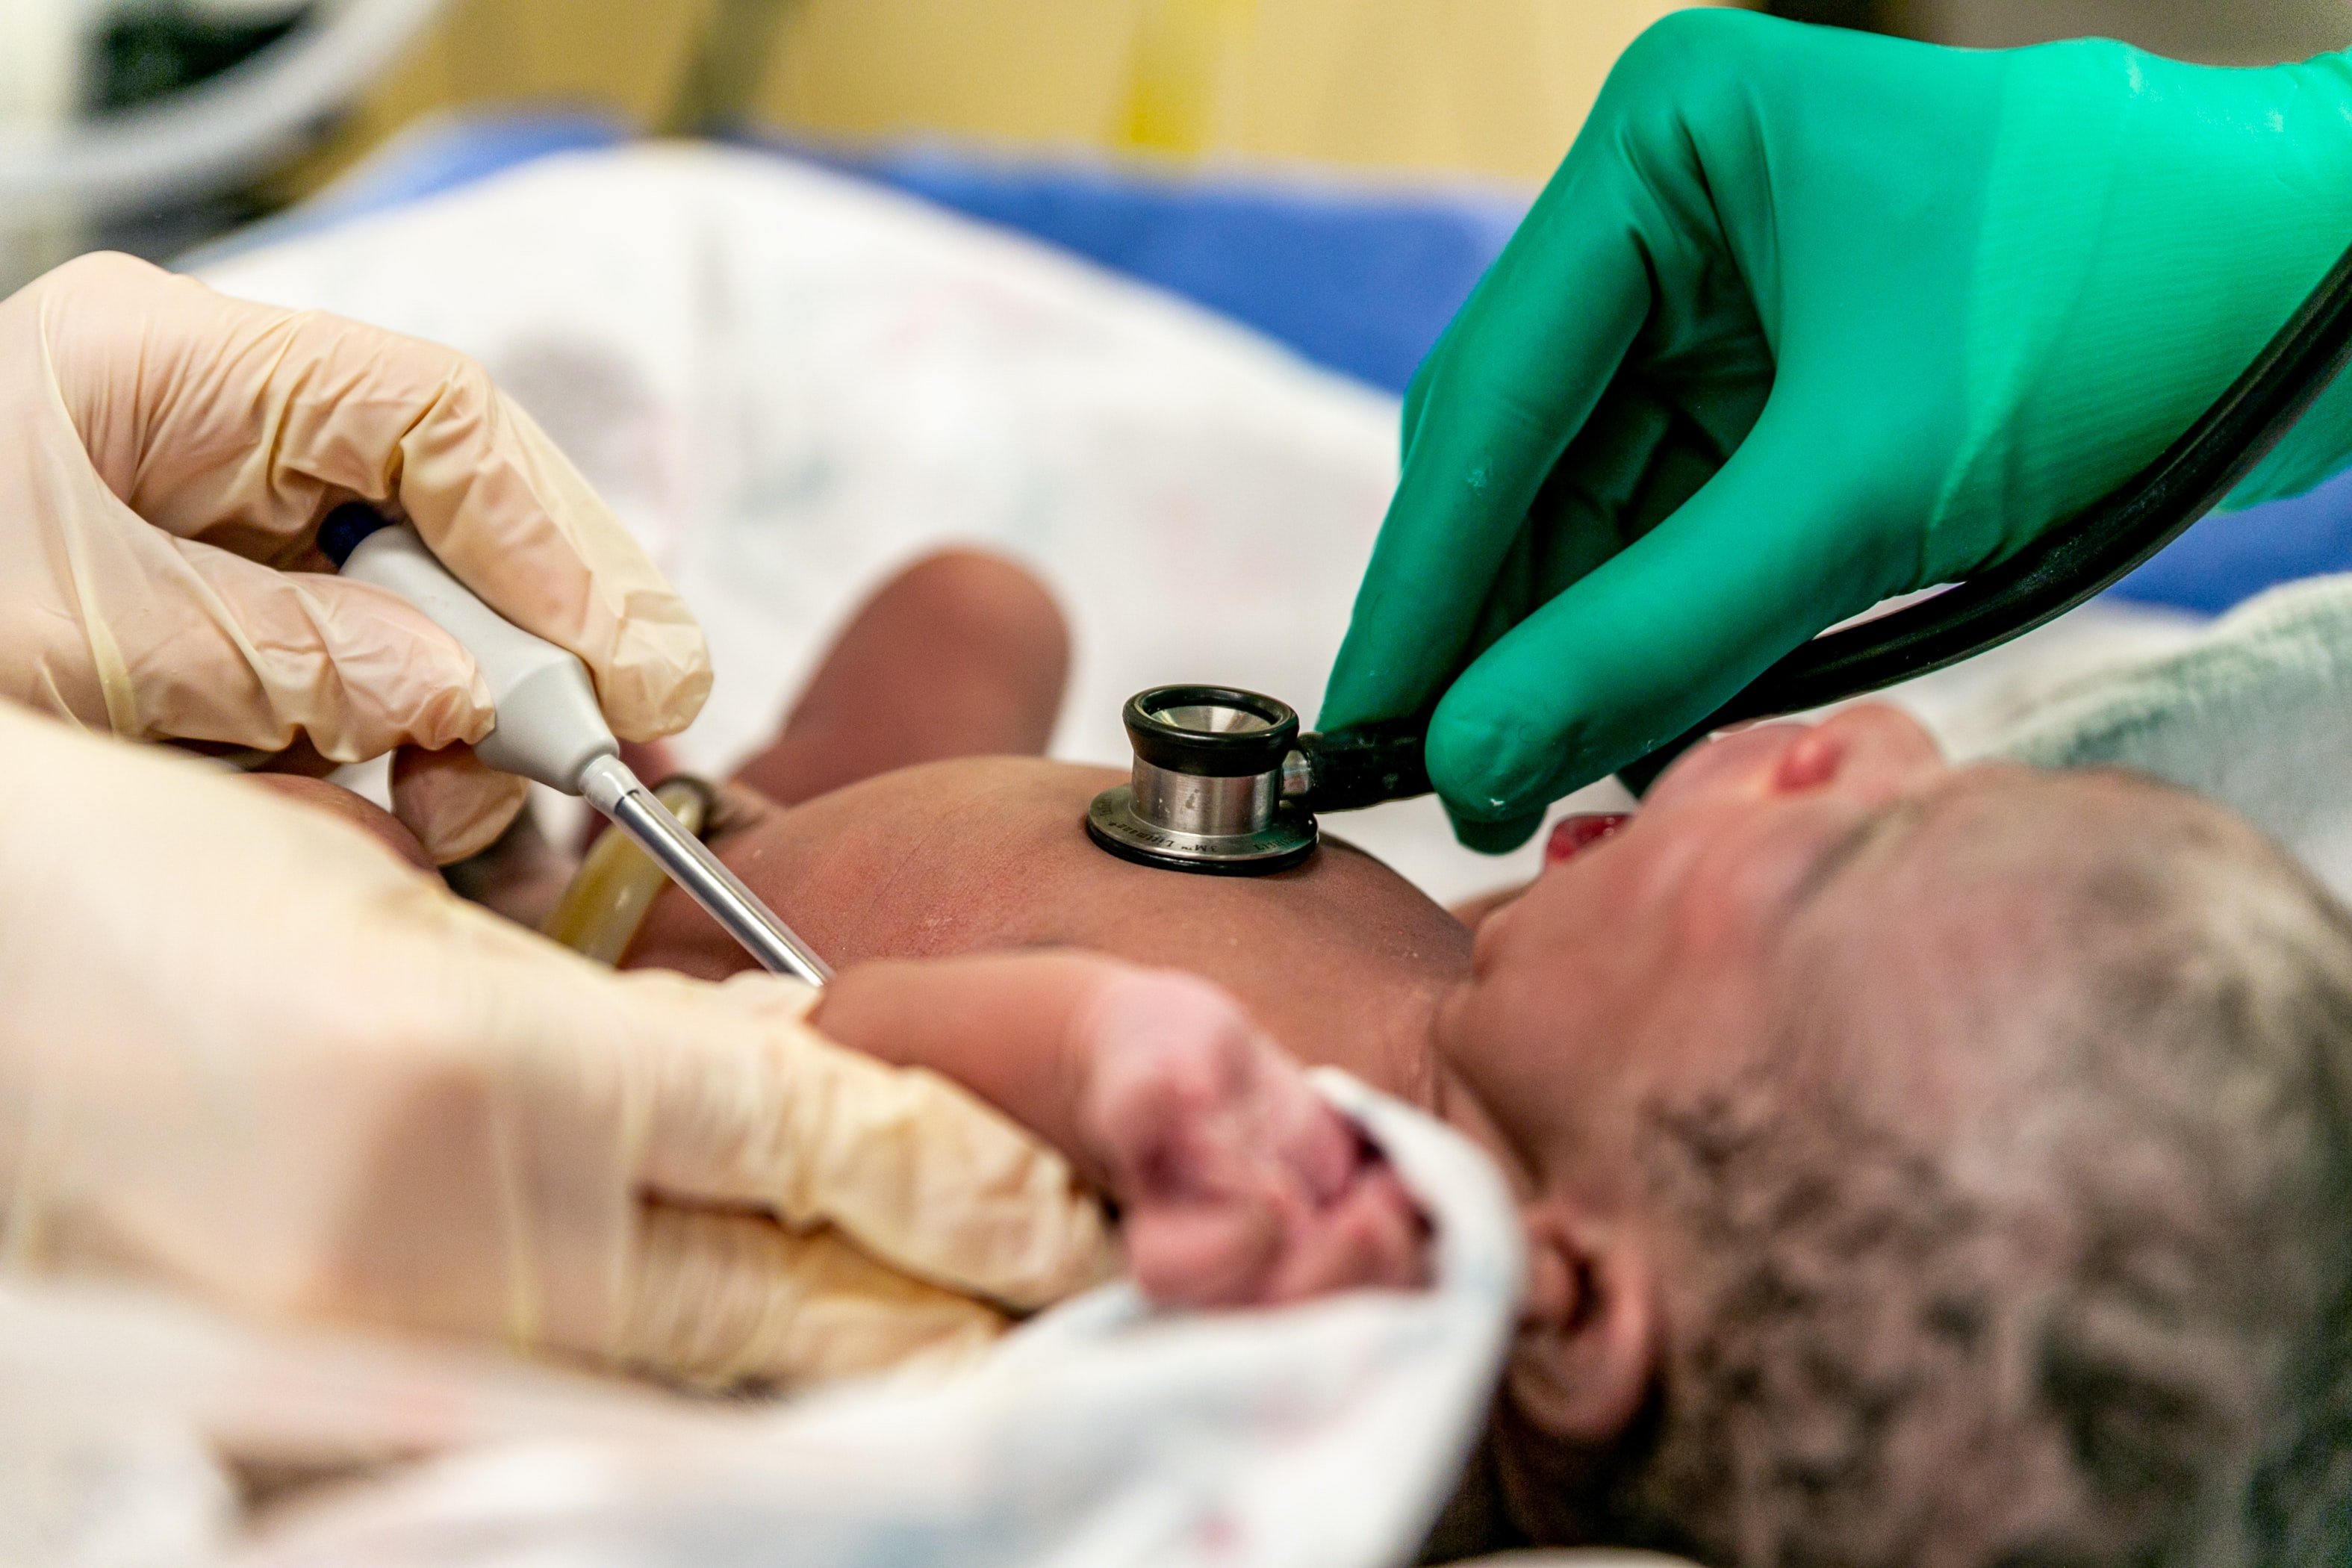 The newborn baby was examined by doctors at the airport. | Source: Unsplash